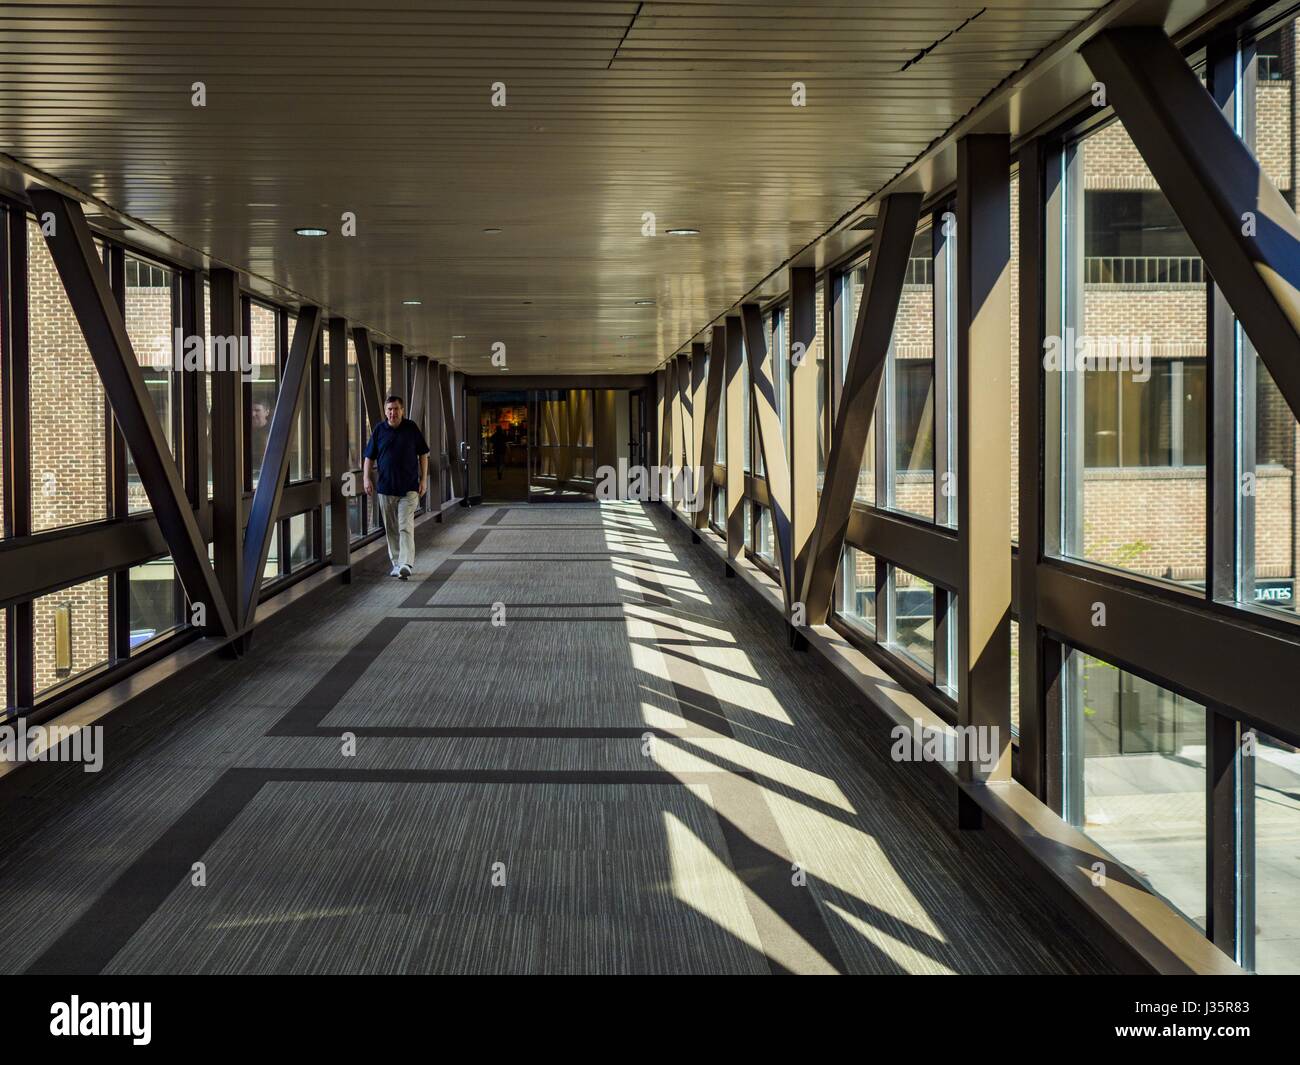 May 3, 2017 - Minneapolis, Minnesota, U.S - A person in a Minneapolis skyway. The skyways are enclosed pedestrian overpasses that connect downtown buildings. The Minneapolis Skyway was started in the early 1960s as a response to covered shopping malls in the suburbs that were drawing shoppers out of the downtown area. The system grew sporadically until 1974, when the construction of the IDS Center and its center atrium, called the Crystal Court, served as a hub for the downtown skyway system. There are 8 miles of skyways, connecting most of the downtown buildings from Target Field (home of the Stock Photo